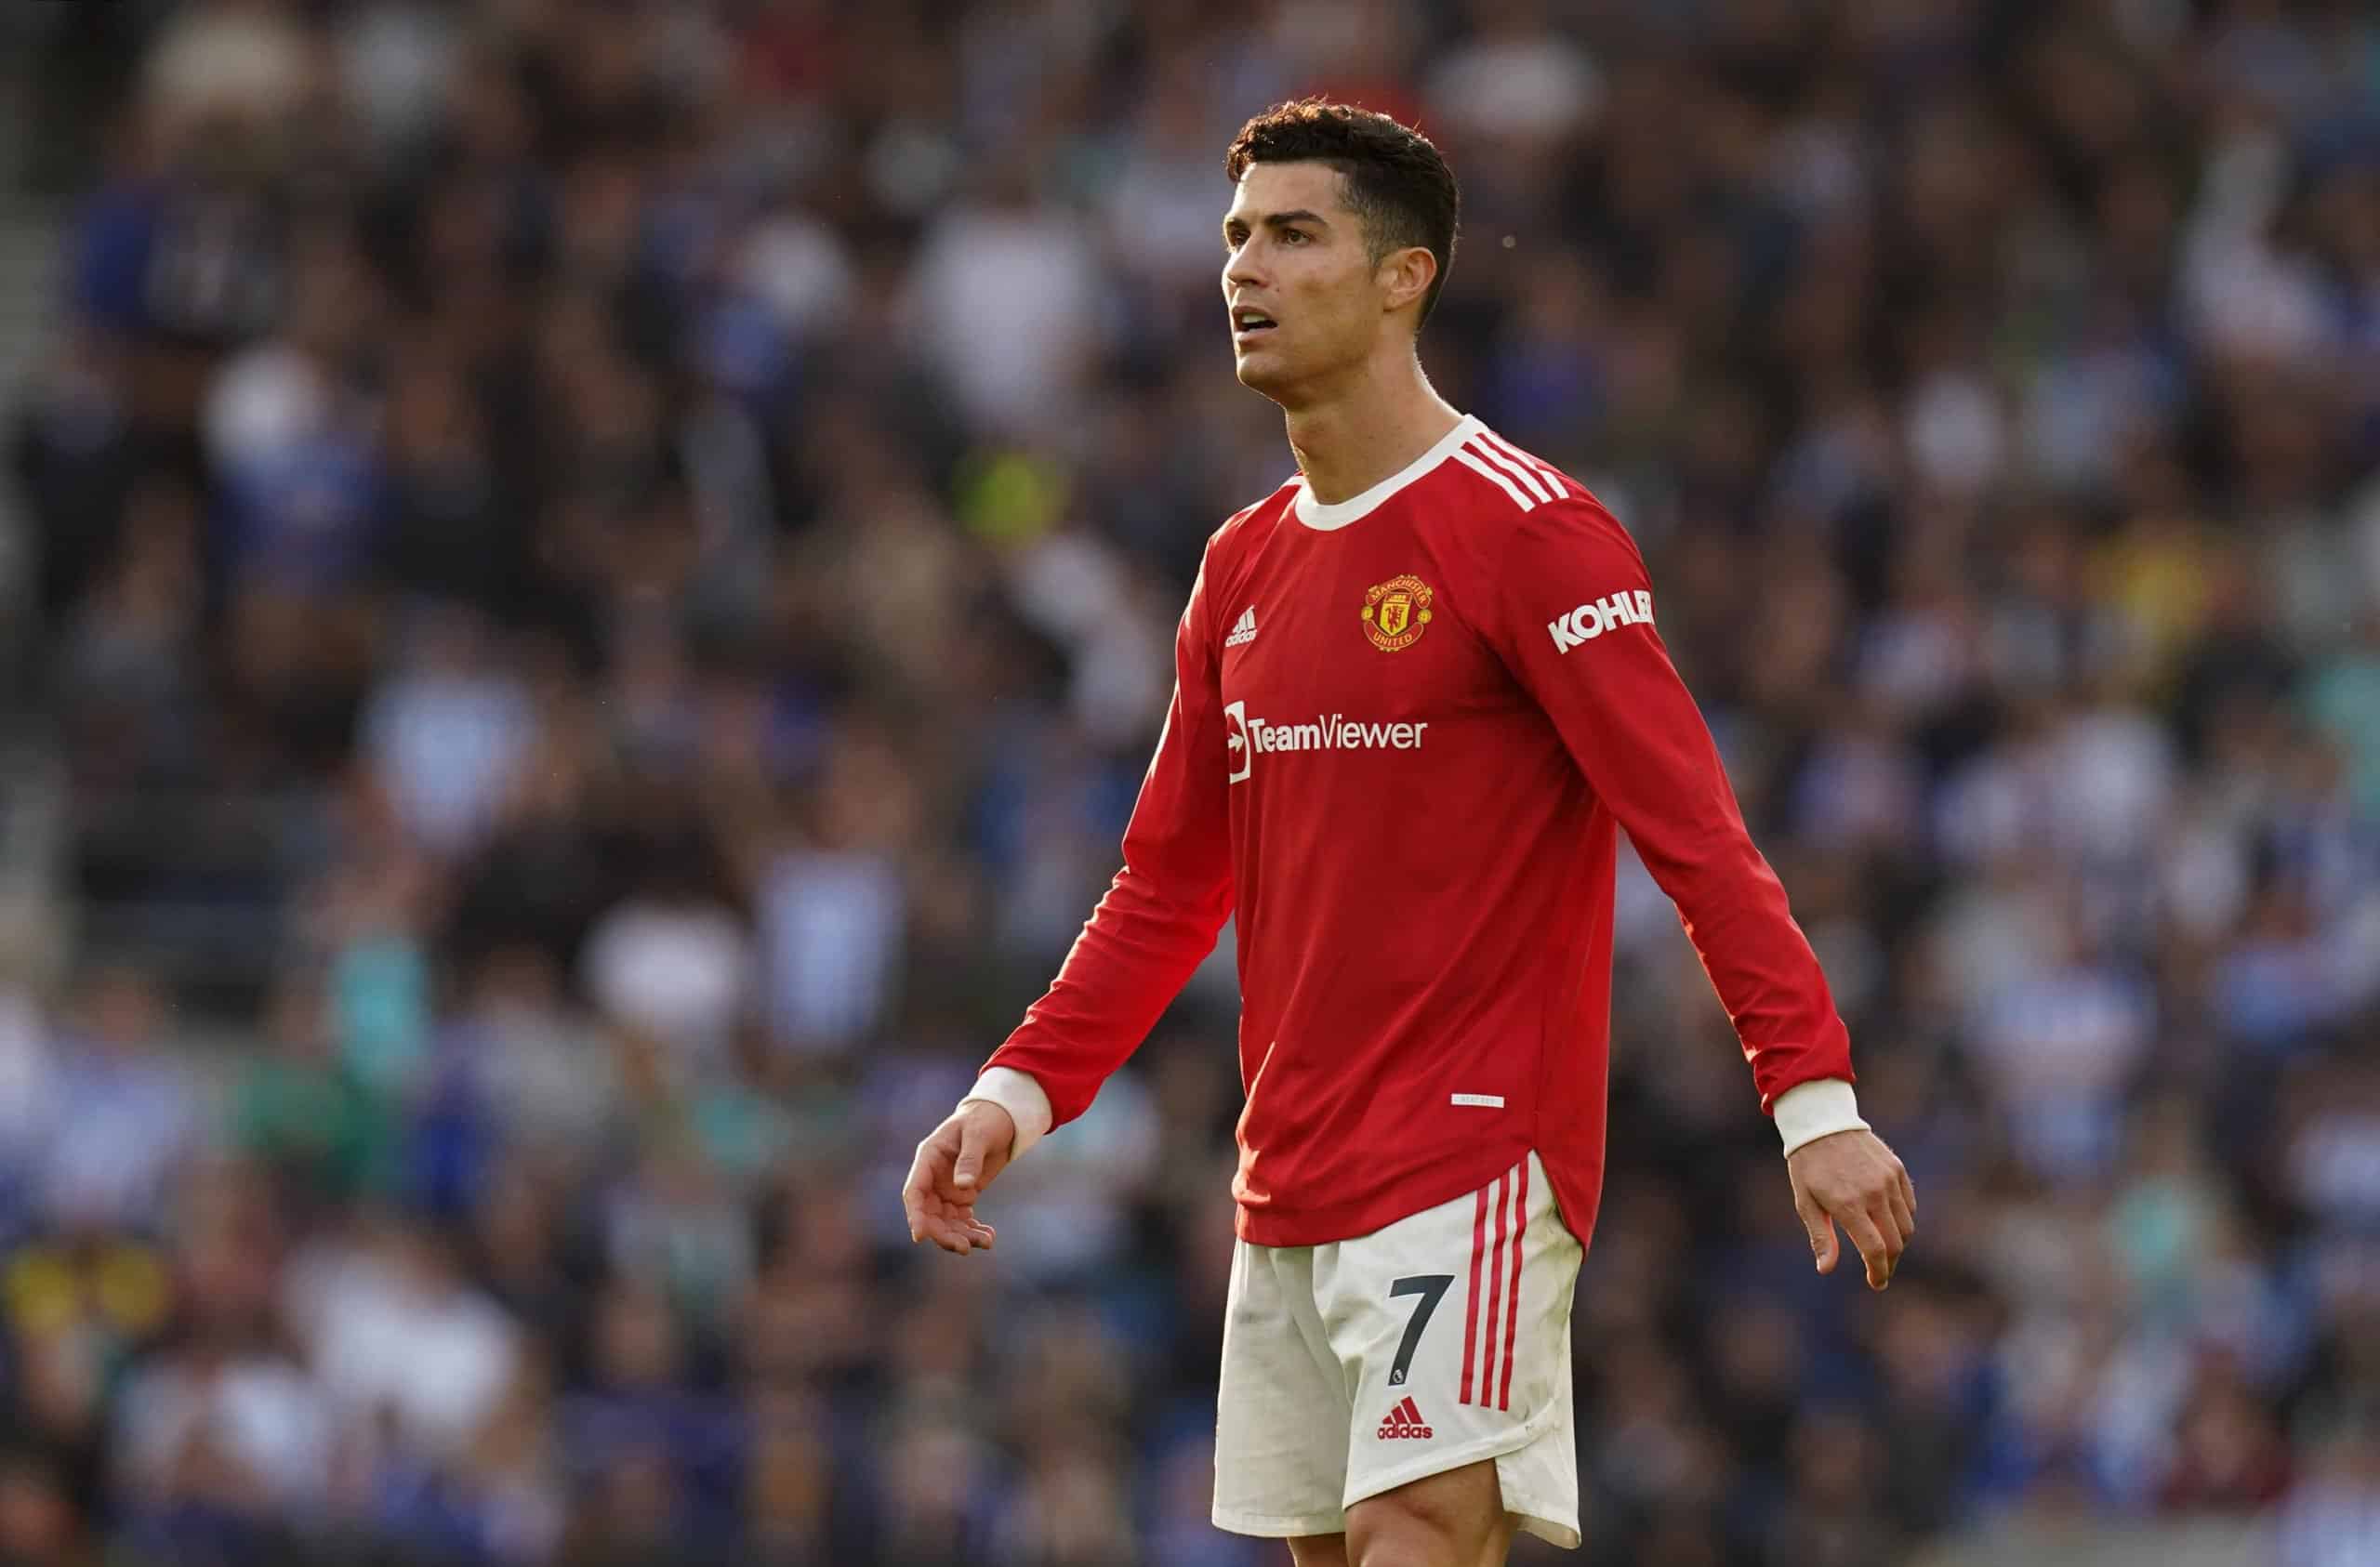 Watch: Cristiano Ronaldo arrives at Old Trafford but does ‘the king play?’